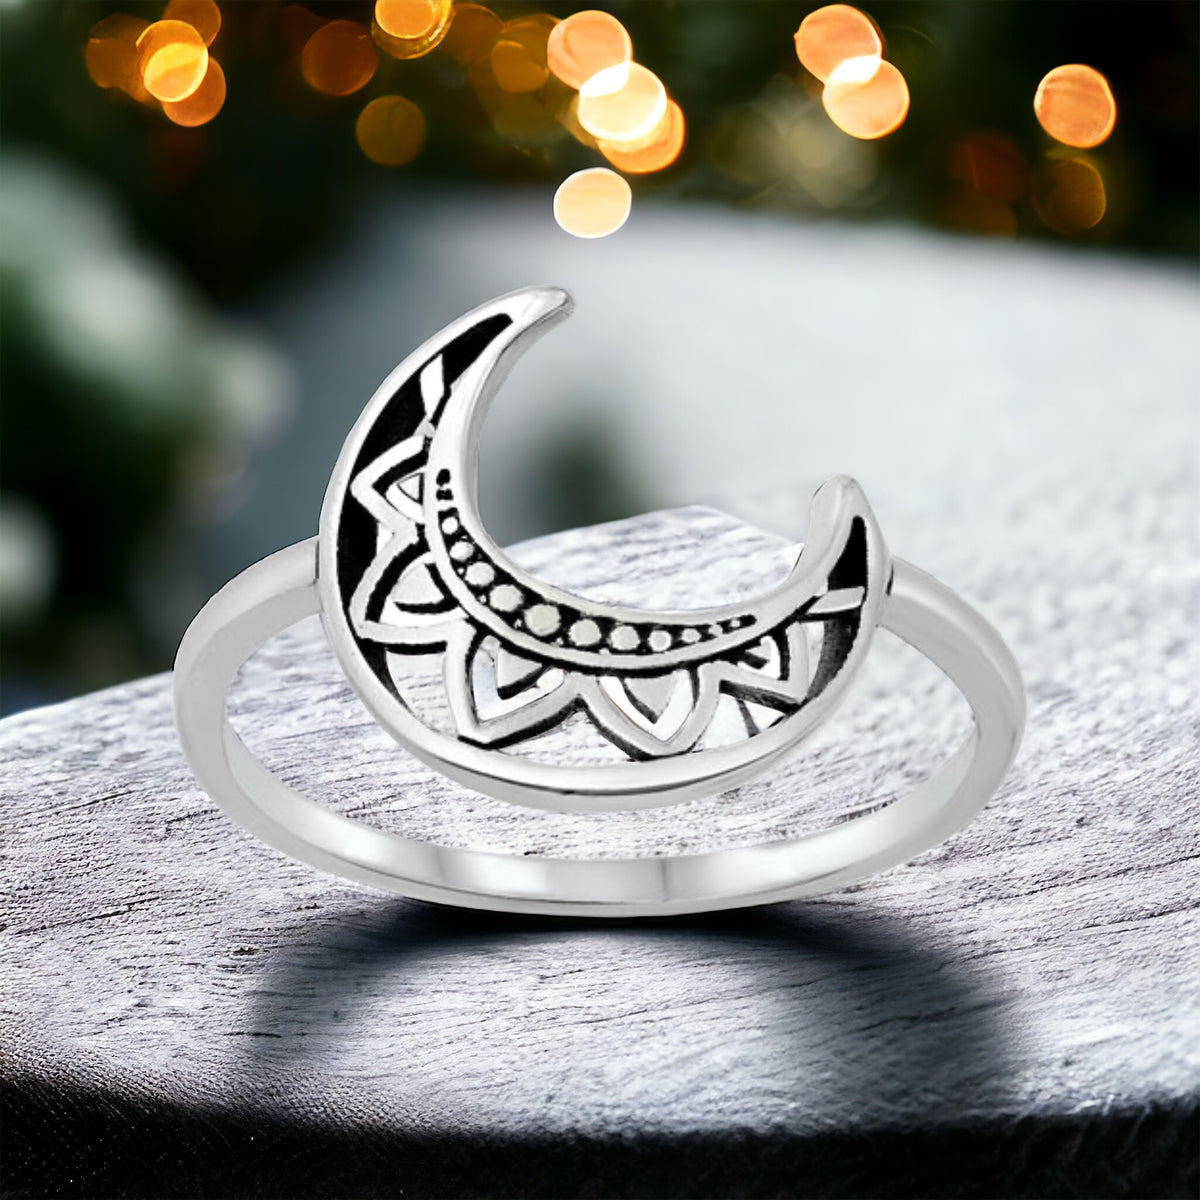 Sterling Silver Bali Crescent Moon Ring